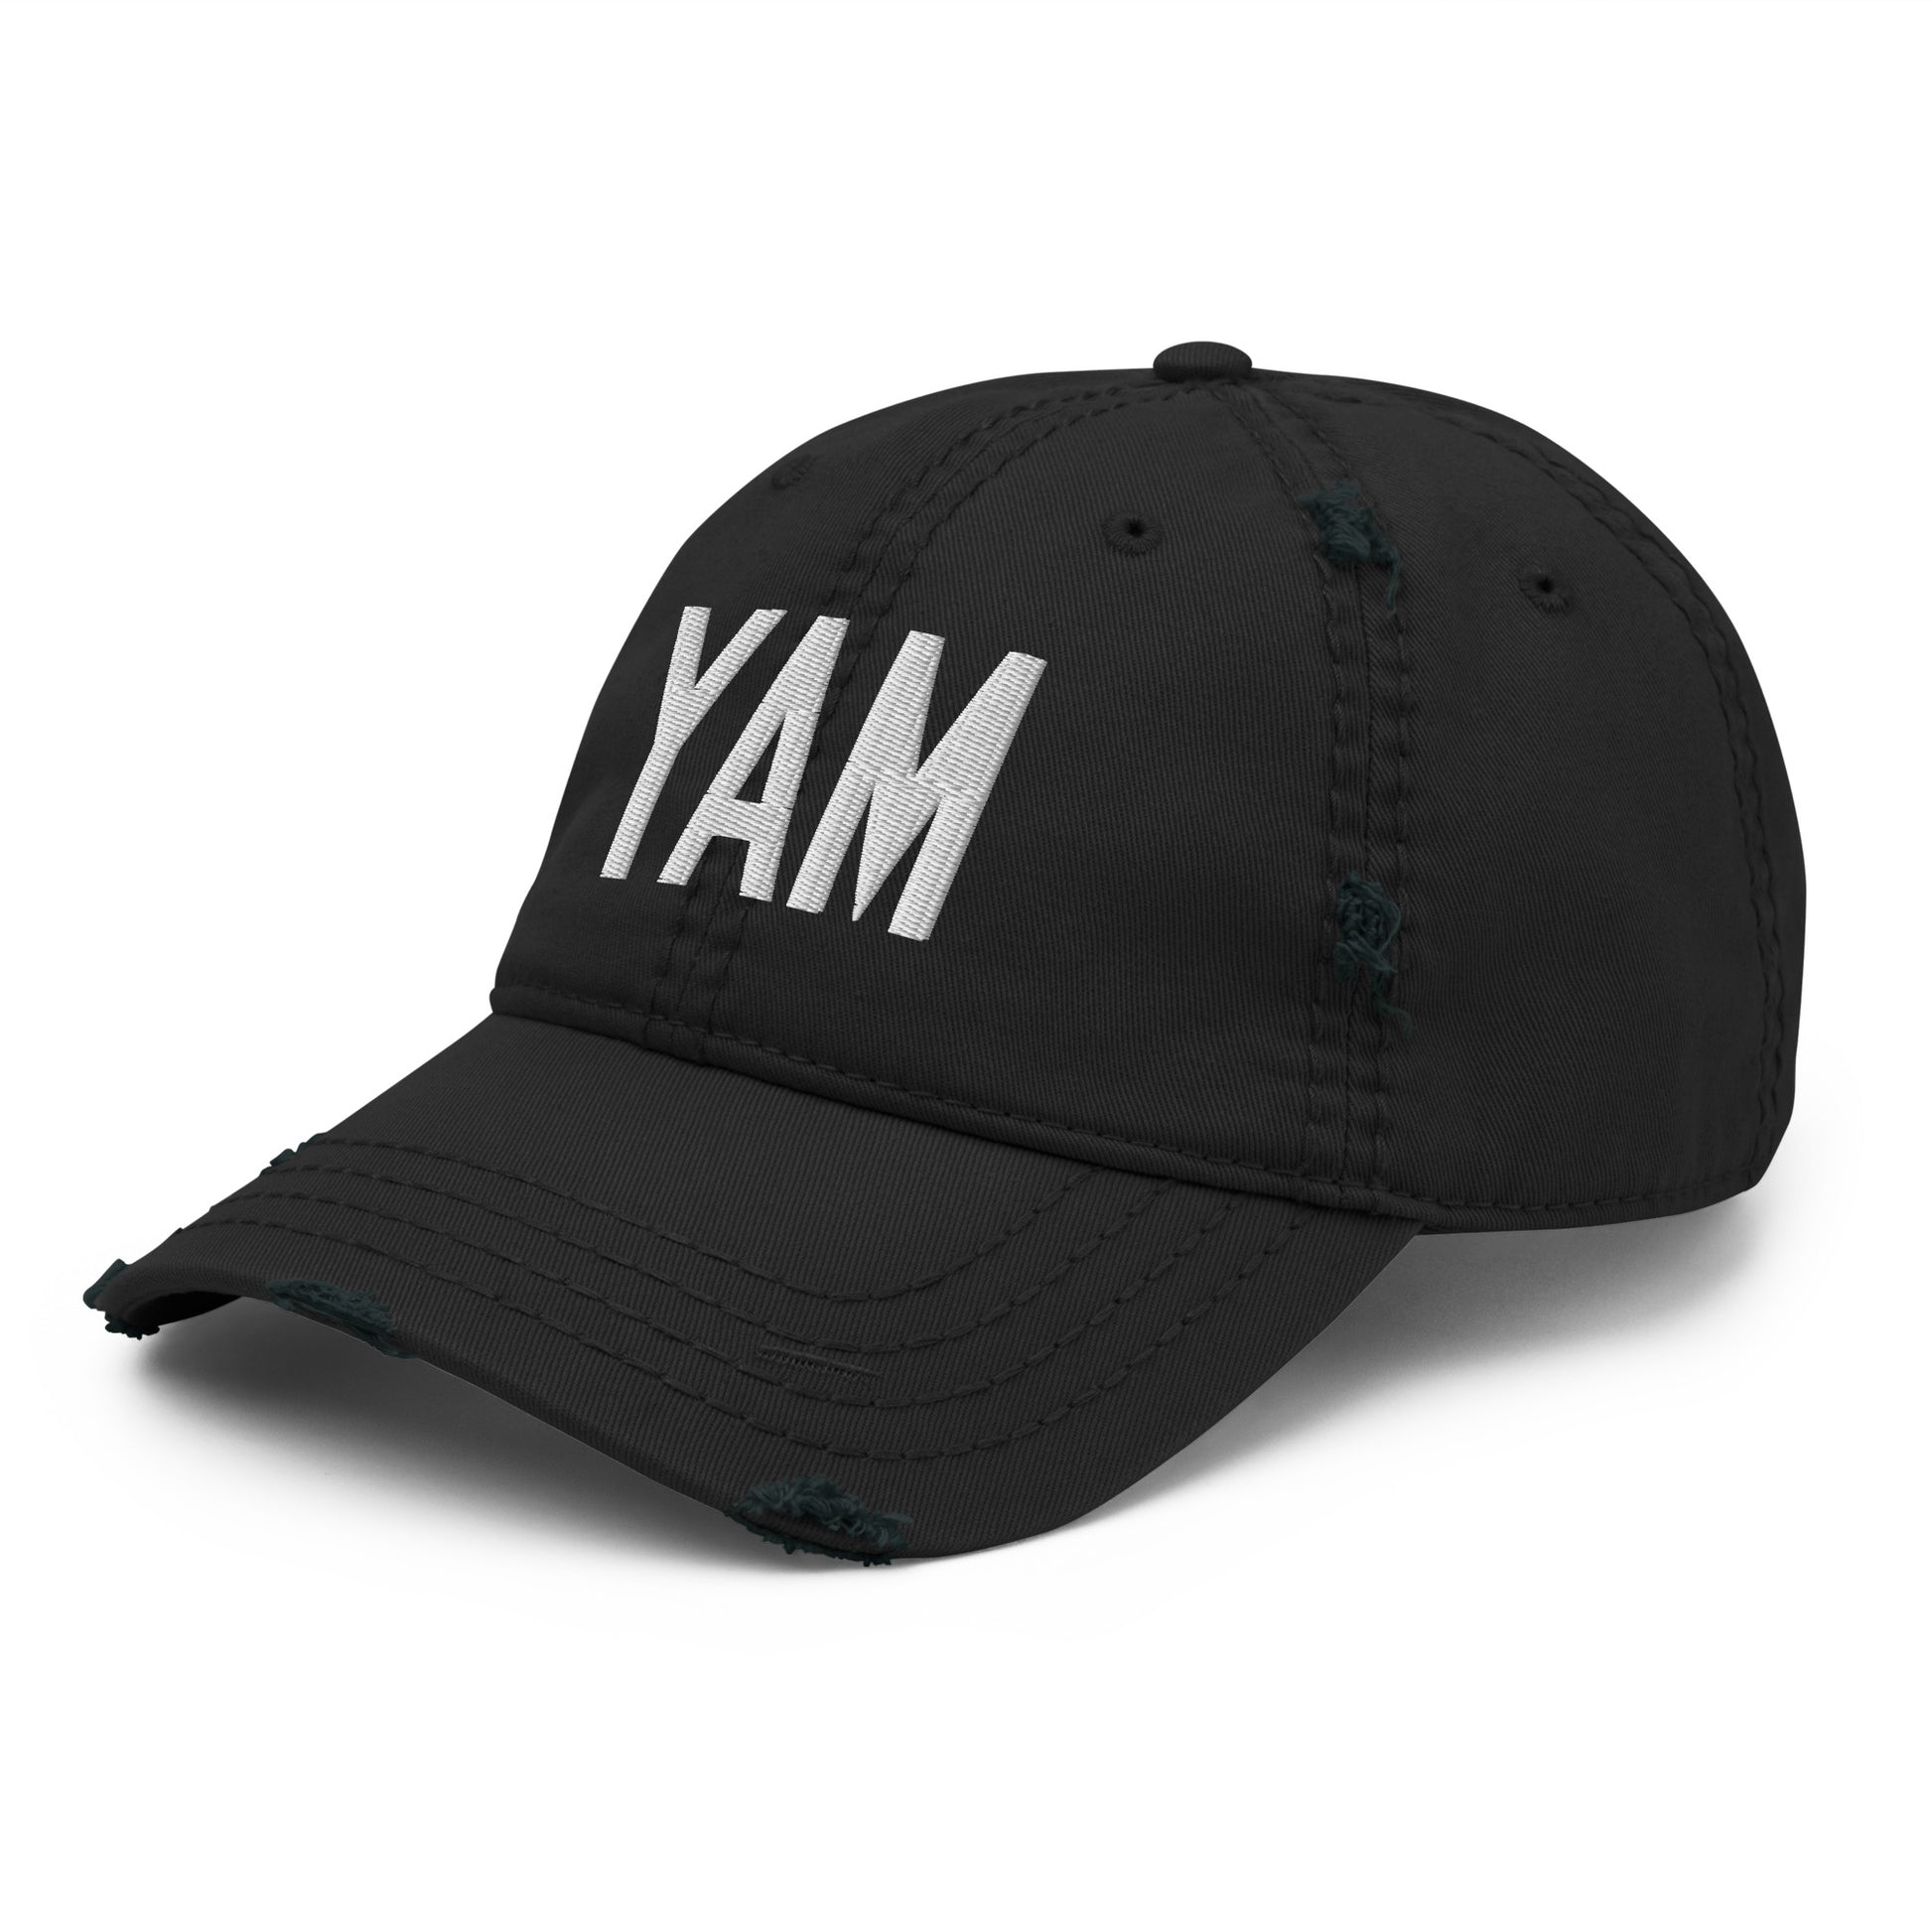 Airport Code Distressed Hat - White • YAM Sault-Ste-Marie • YHM Designs - Image 11